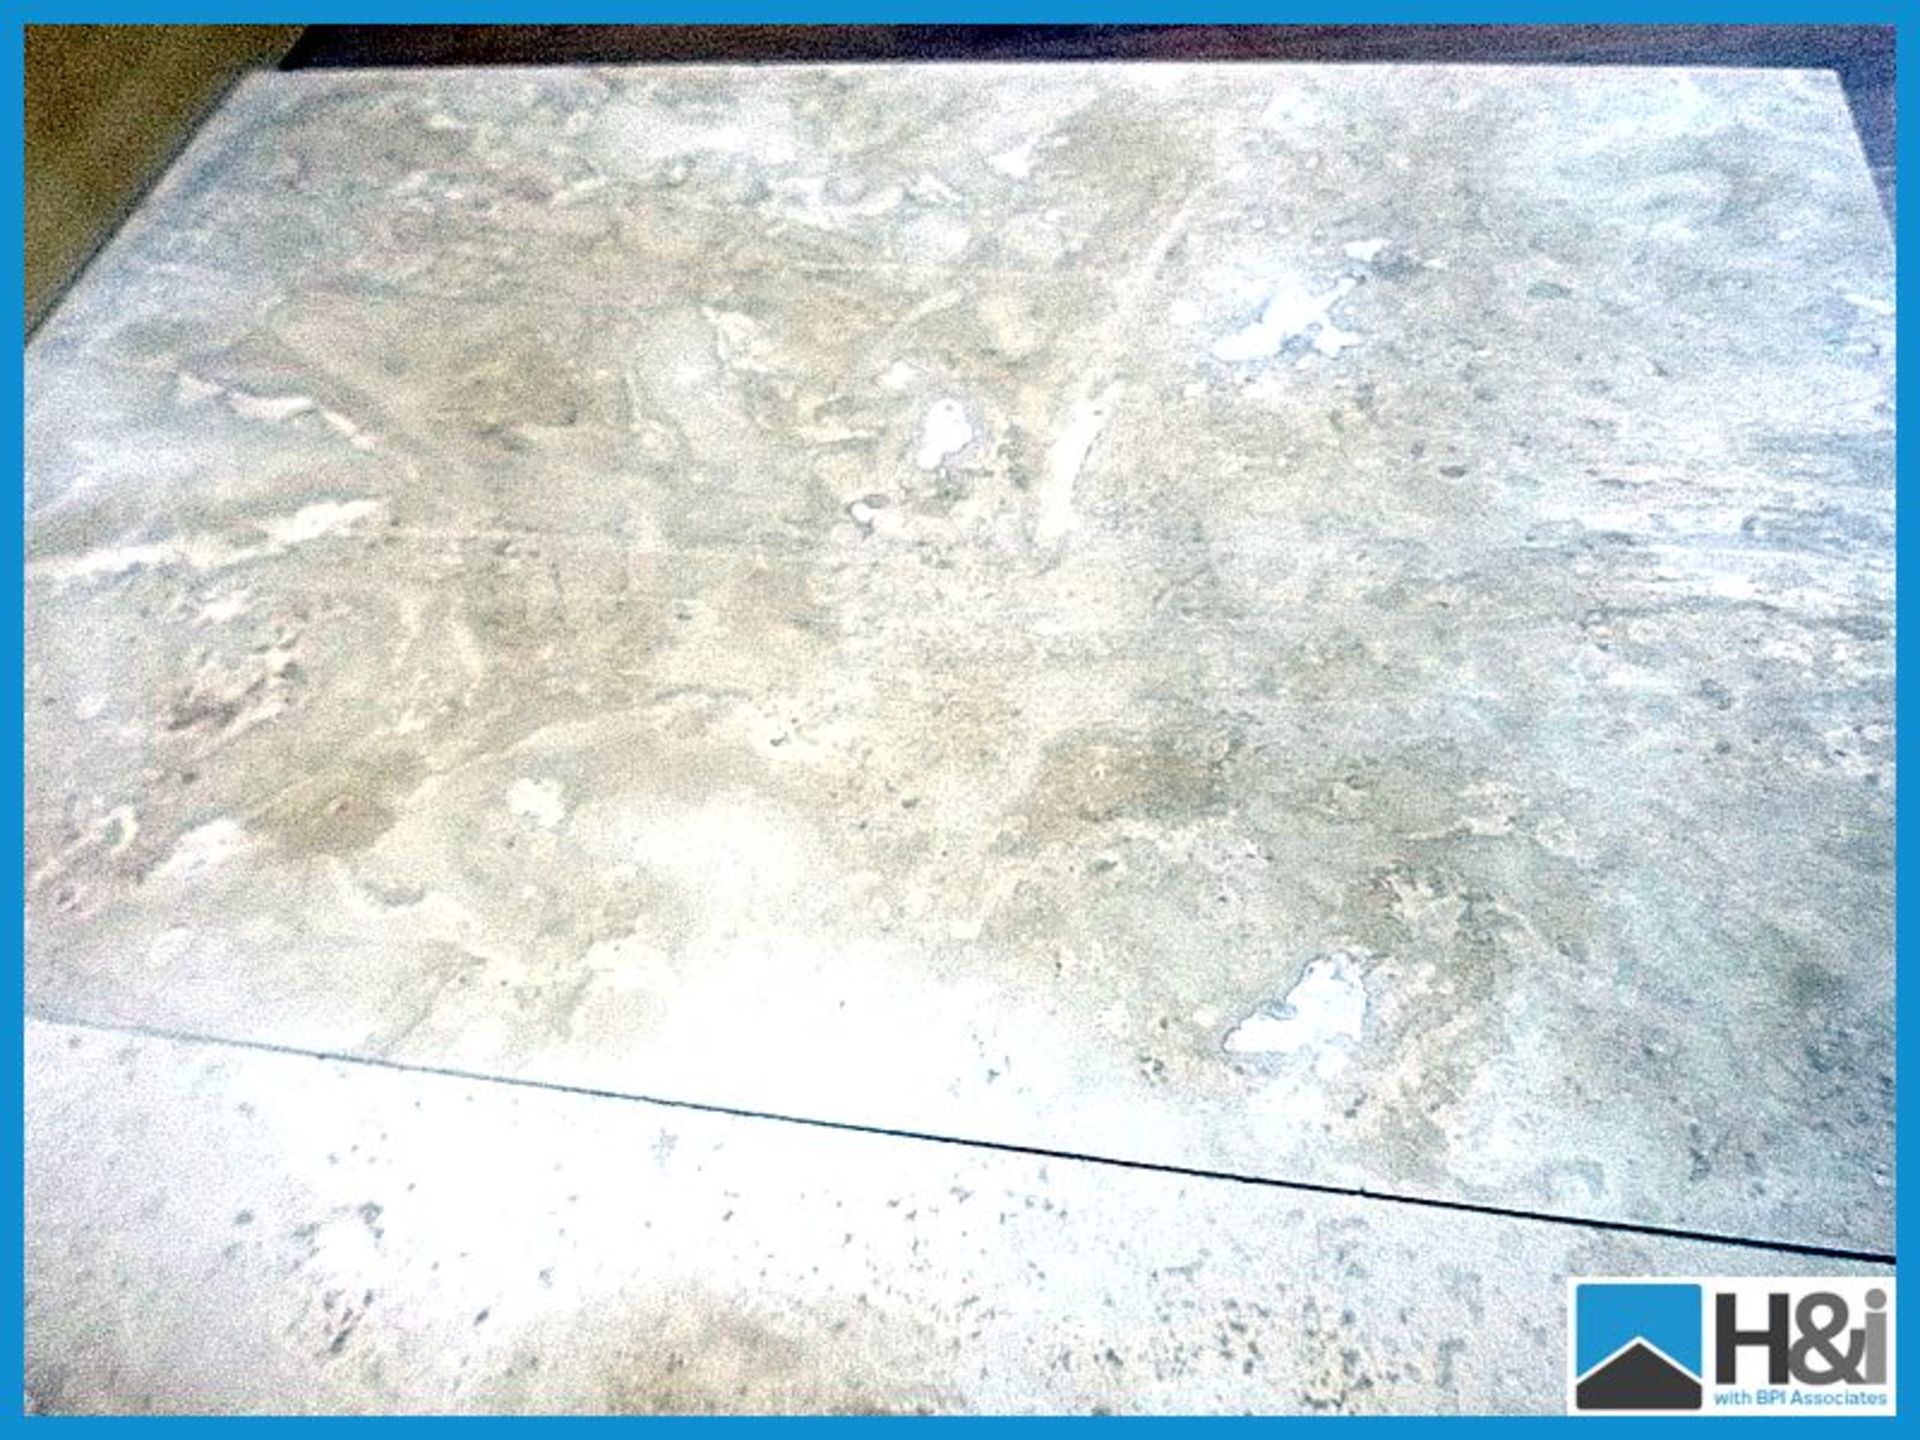 White & Grey Travertine Floor/Wall Tiles,Size 610mm x 400mm (Approx 40 Tiles) (Approx 8-10 Sqm) - Image 2 of 3